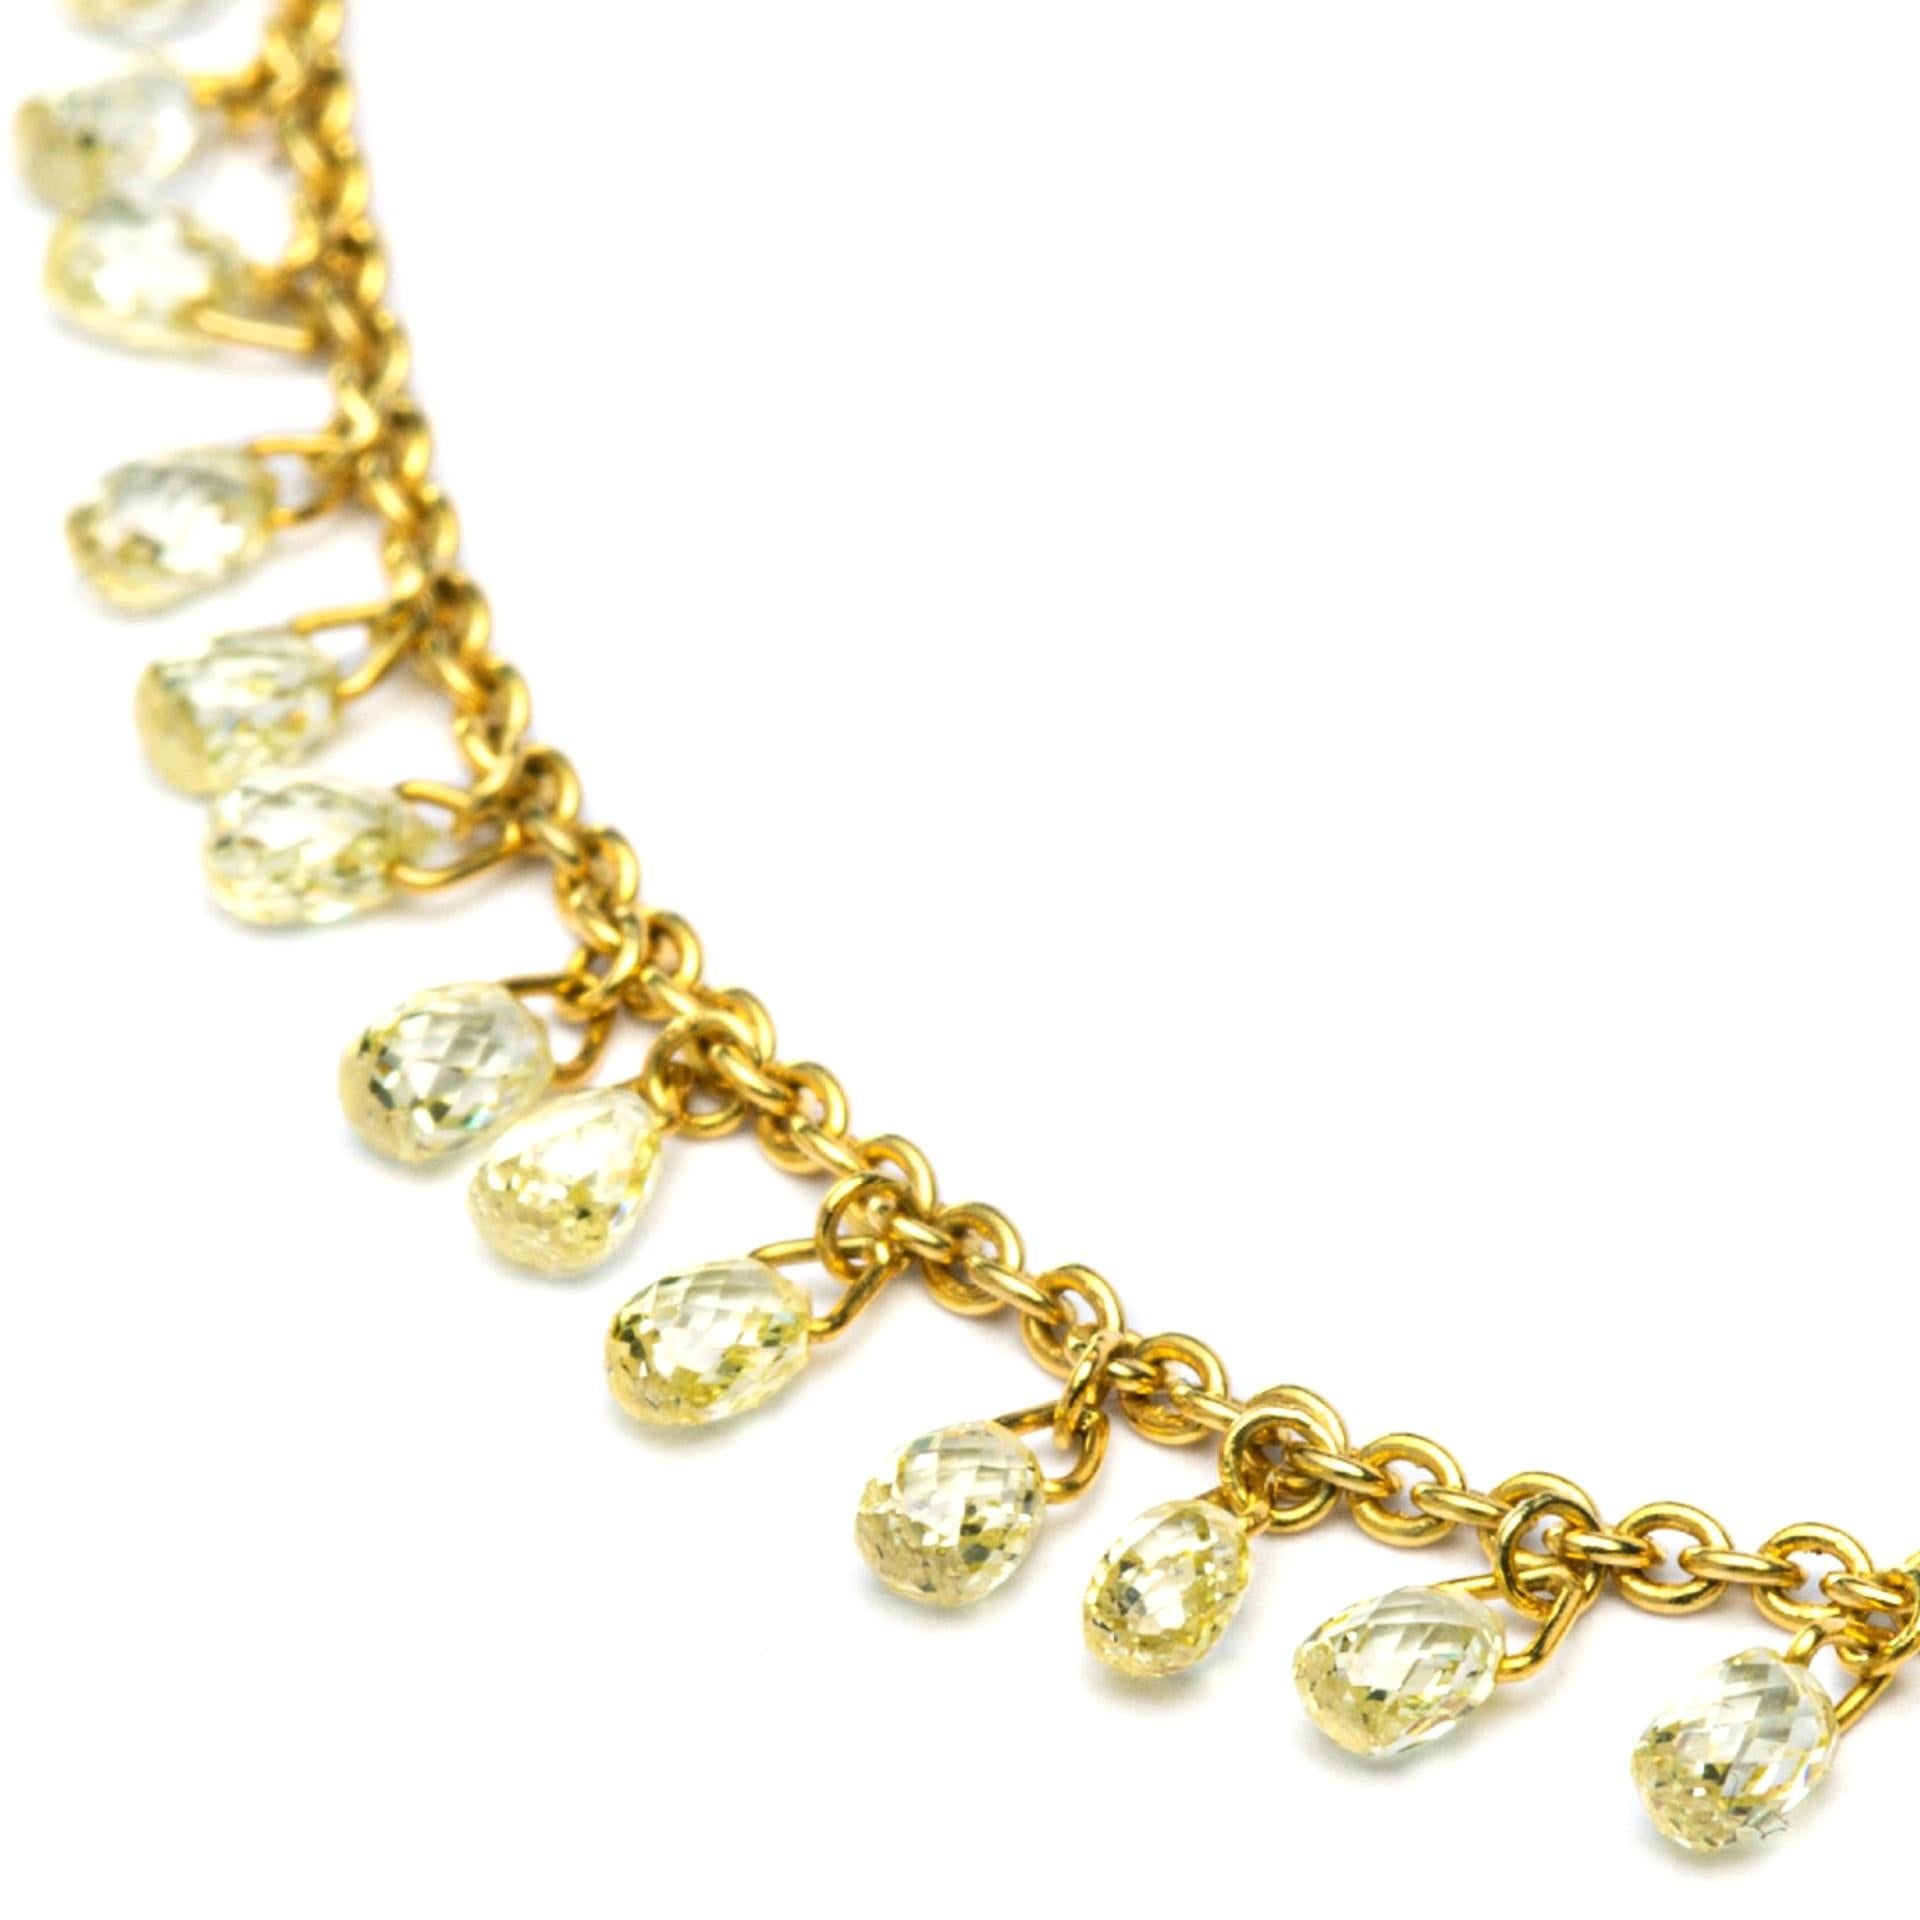 floating diamond solitaire necklace